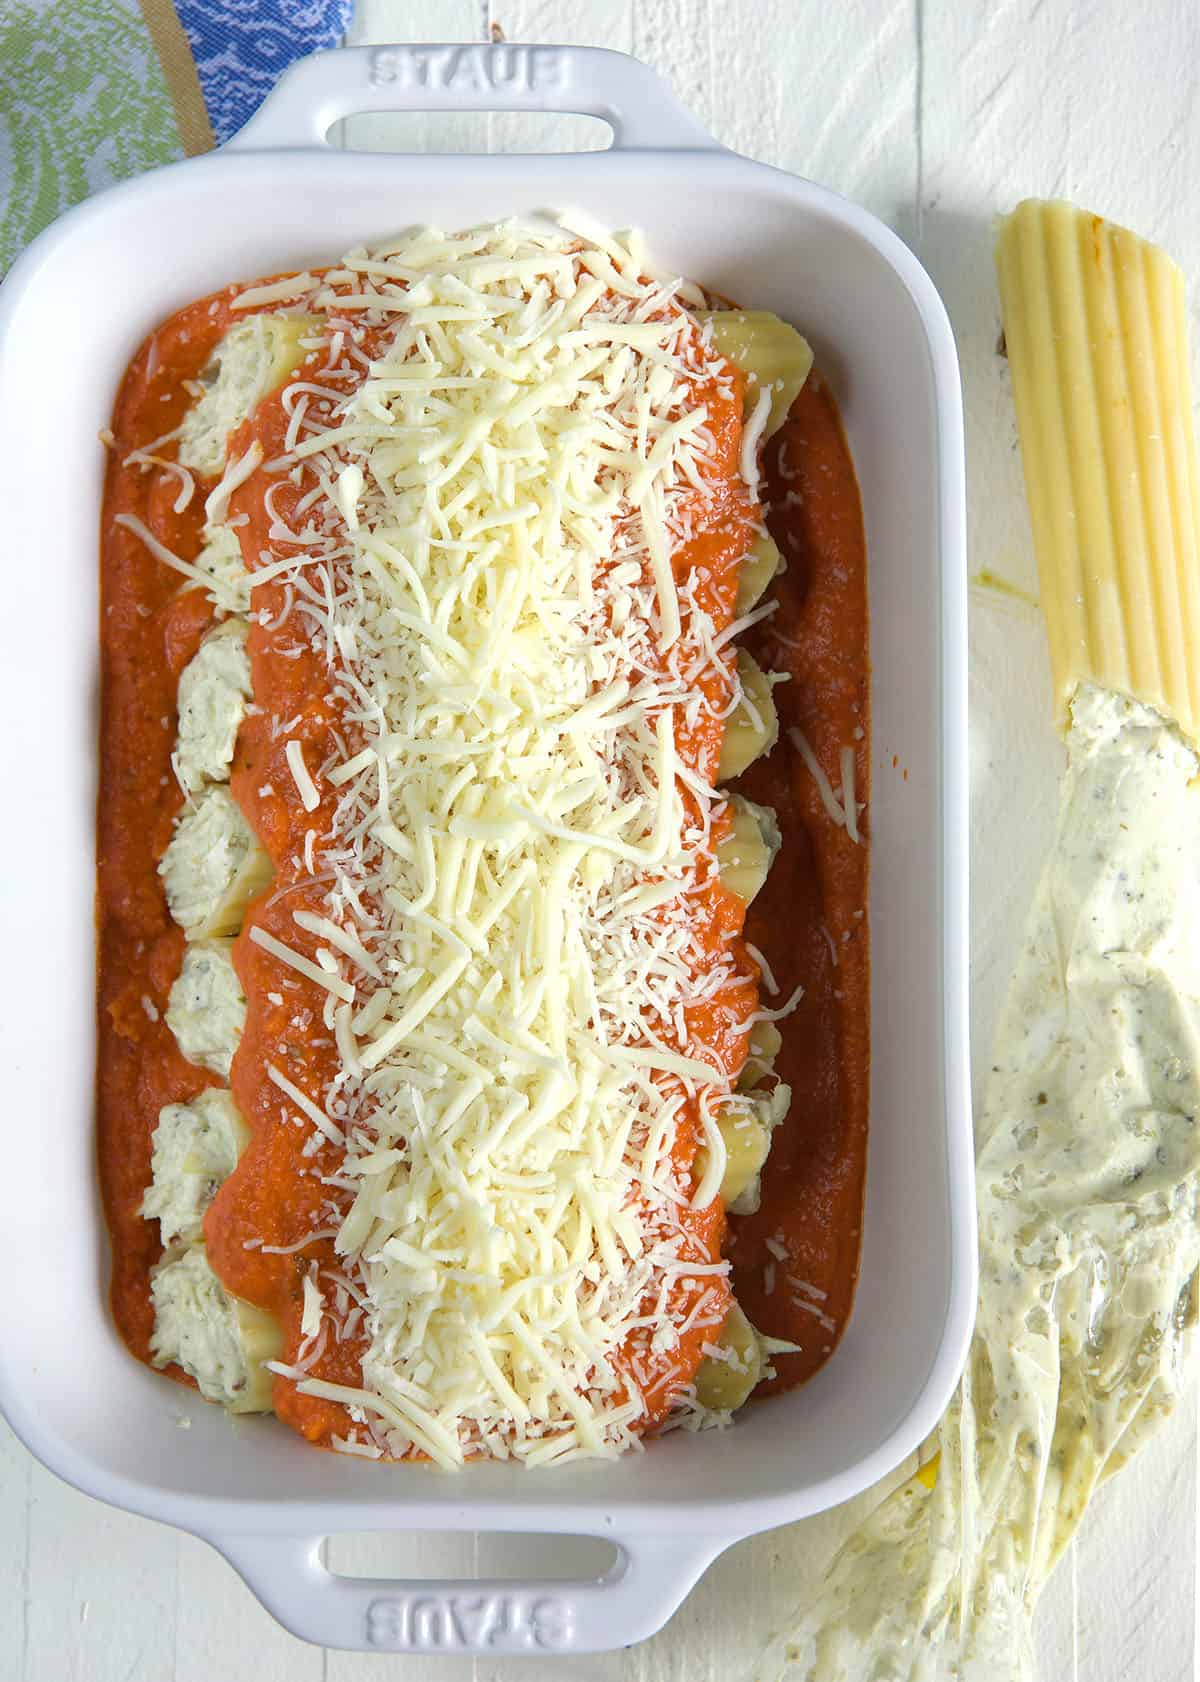 Stuffed manicotti is covered in uncooked cheese and sauce. 